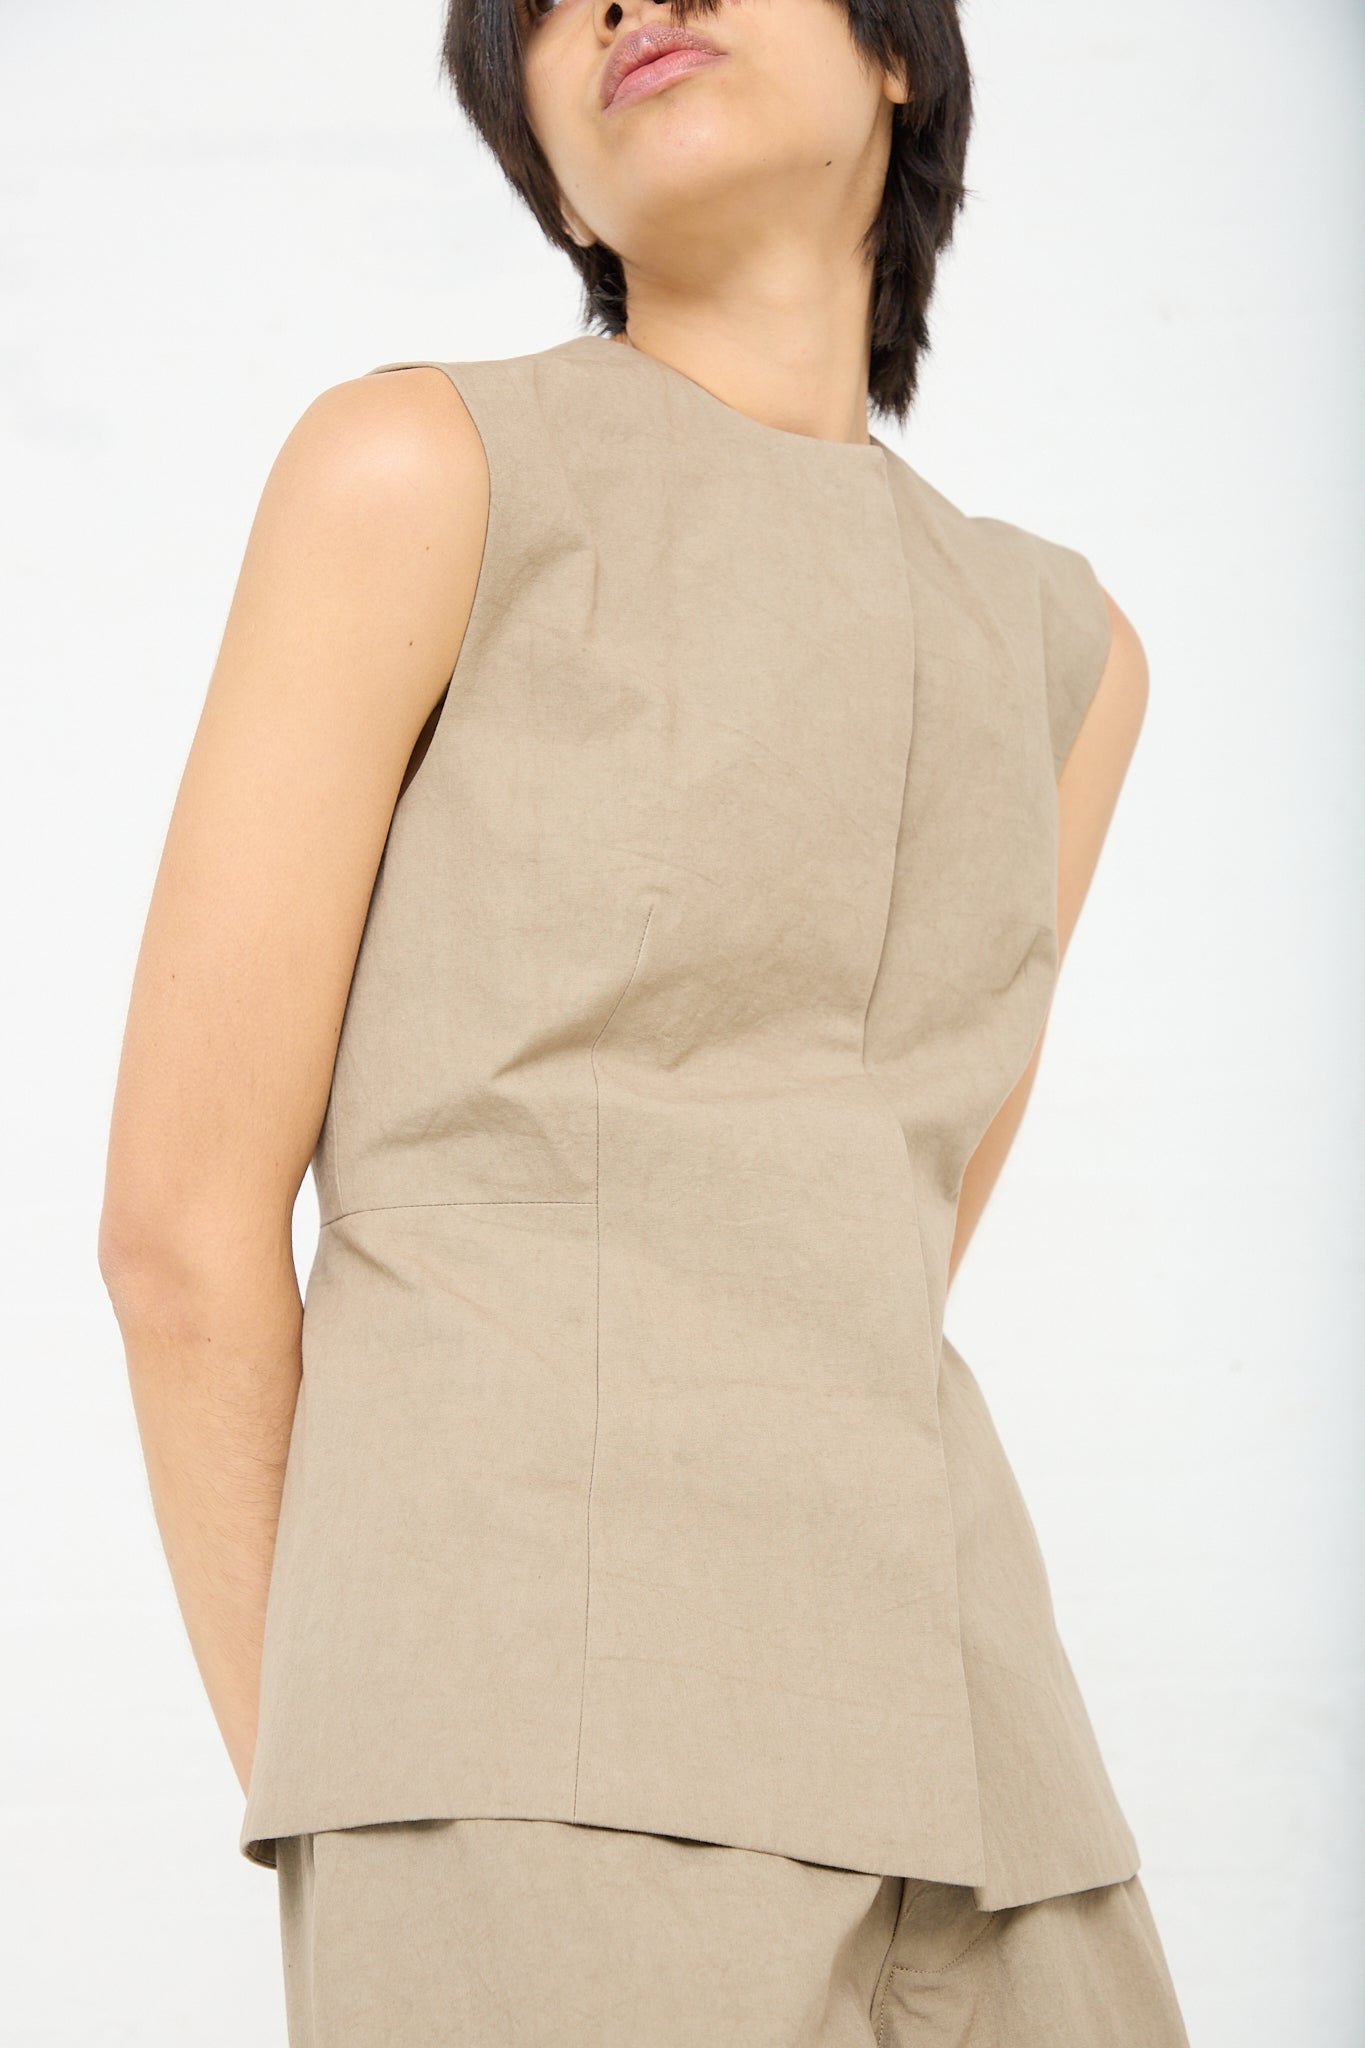 A woman wearing a Sleeveless Structure Bodice in Drab (Olive Brown) cotton by Lauren Manoogian.